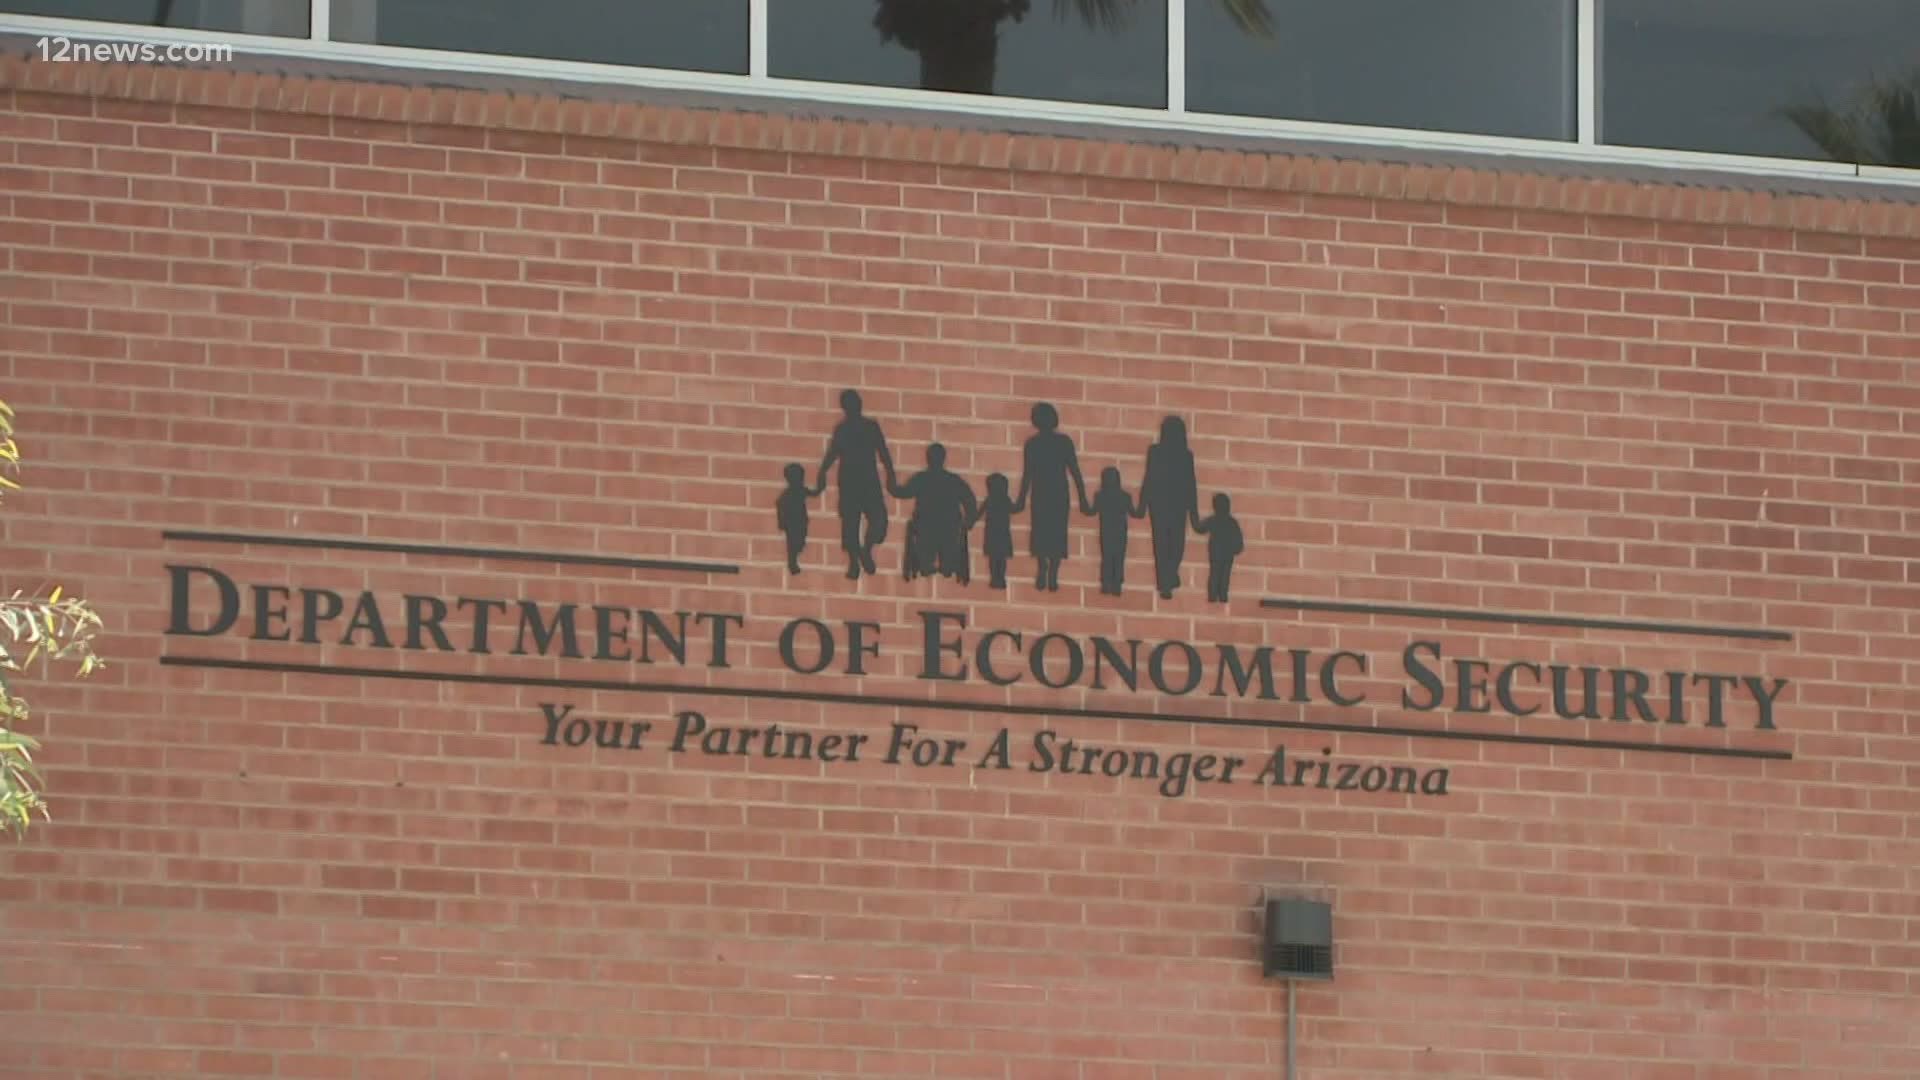 Arizonans are still waiting for unemployment benefits they've been approved for. The Department of Economic Security continues to have problems getting payments out.